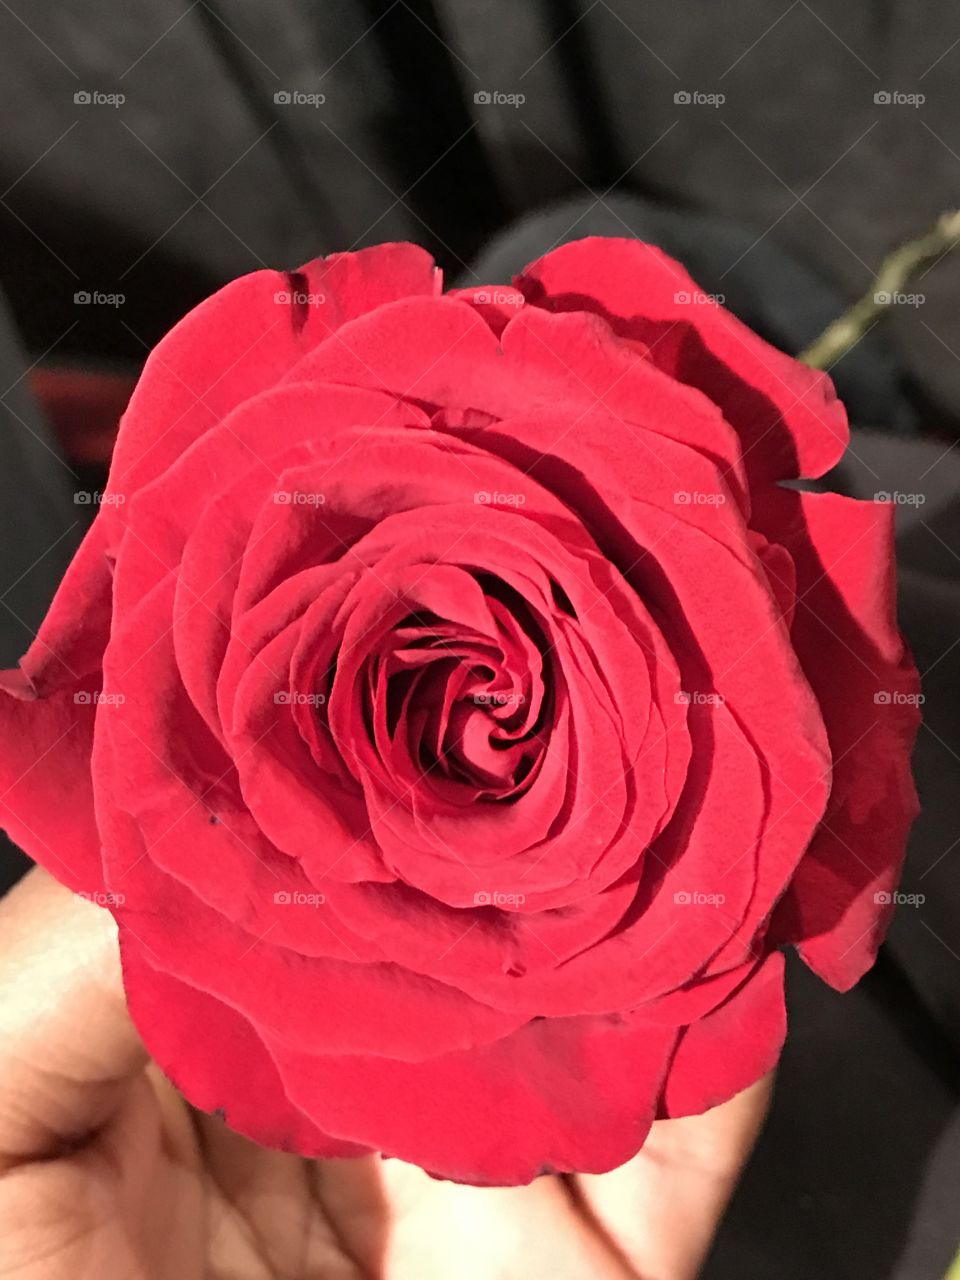 The beauti of a rose flower 